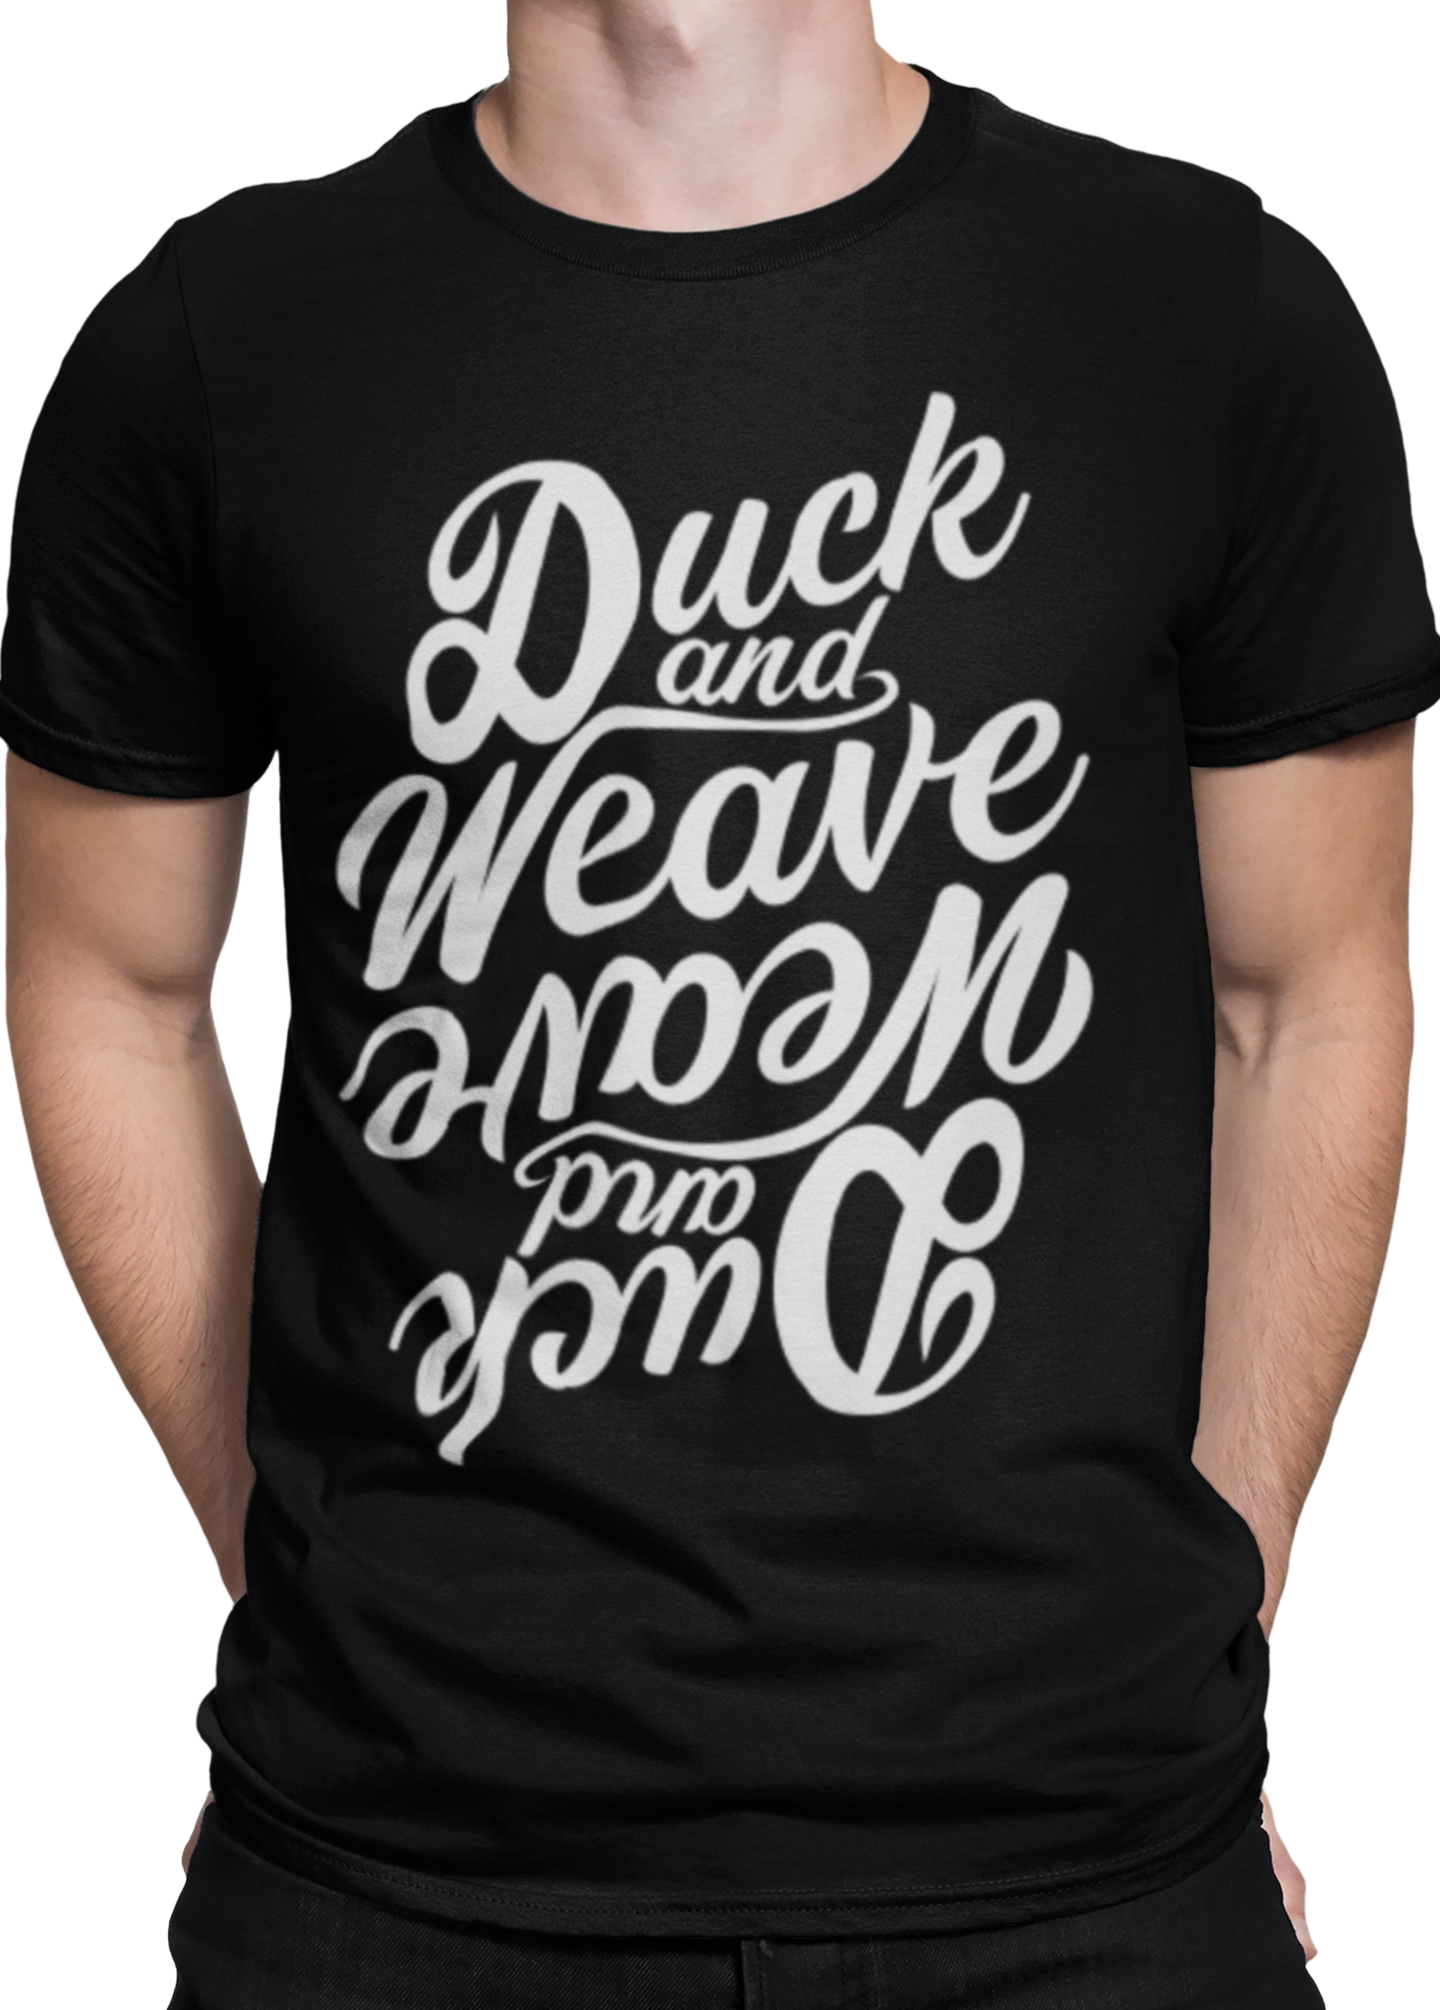 The Duck and Weave cotton tee